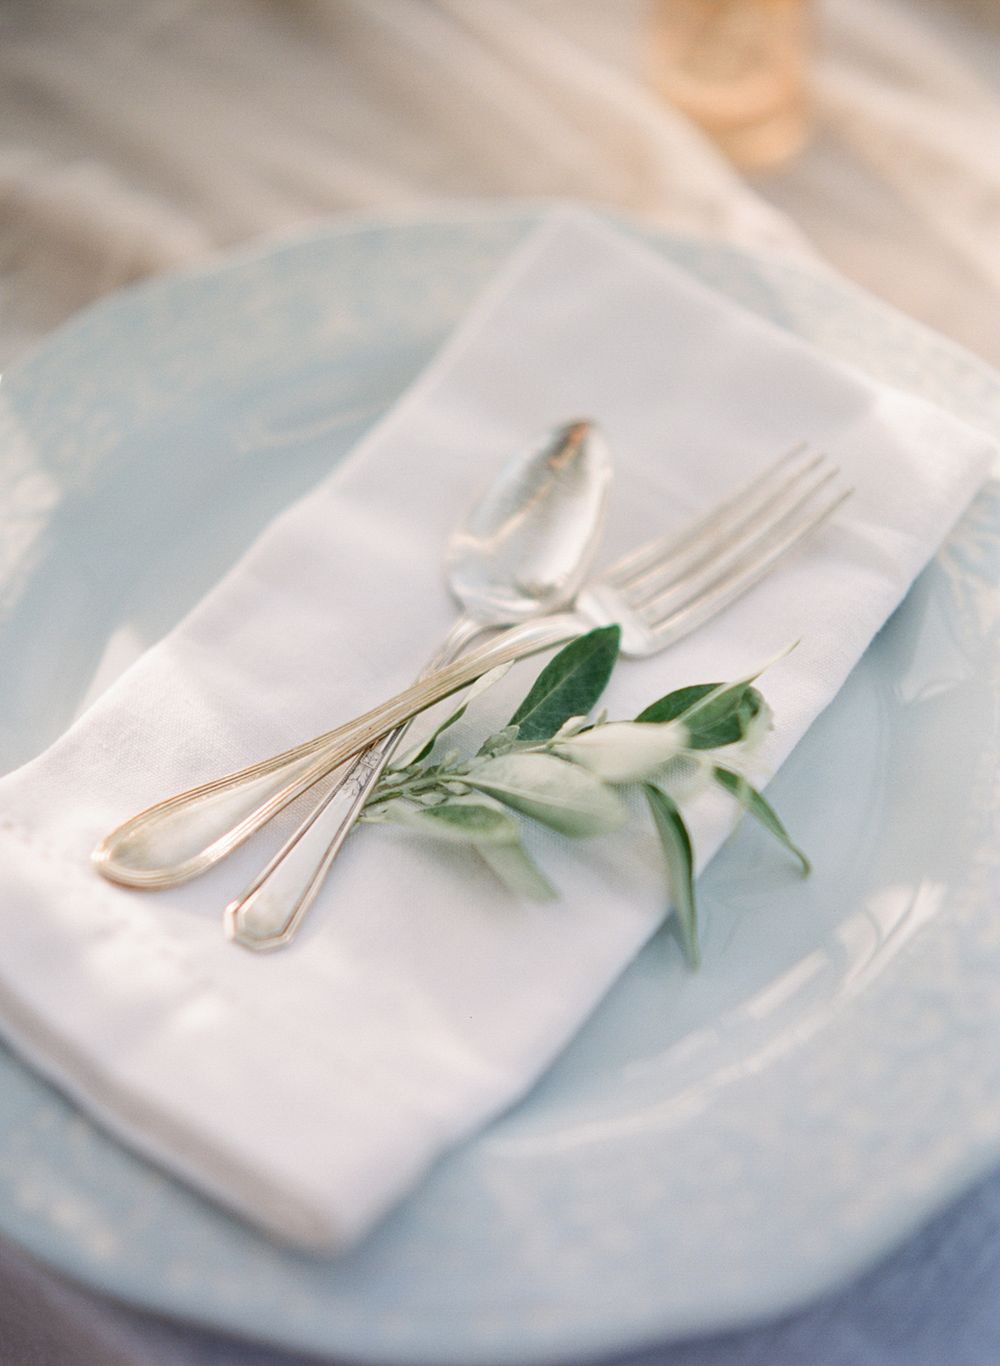 Ethereal Greece Bridal Inspiration with a Blue Dress